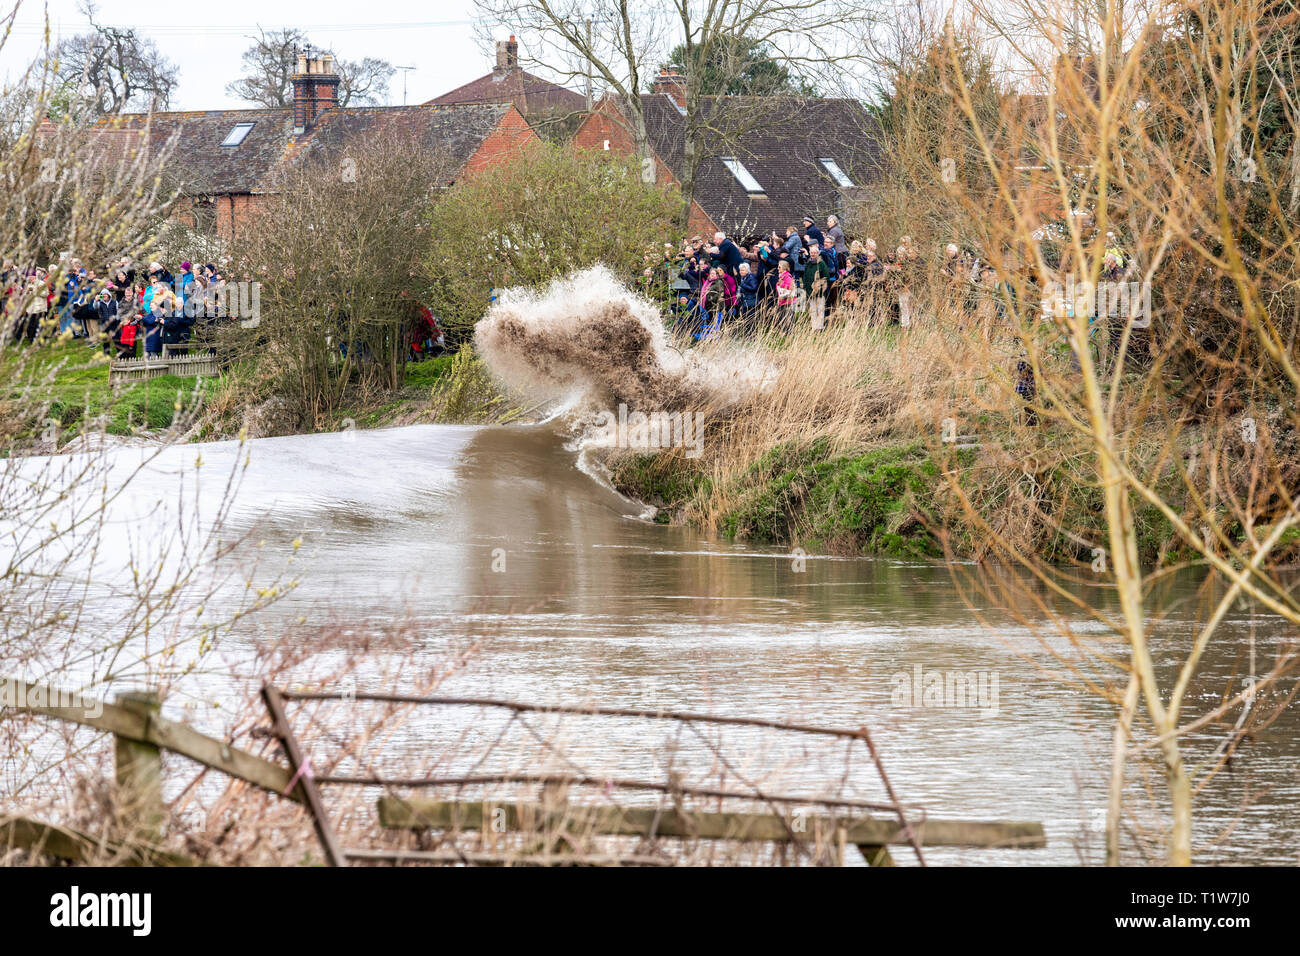 A 5 star Severn Bore on 22/3/2019 breaking against the bank and soaking onlookers at Minsterworth, Gloucestershire UK Stock Photo